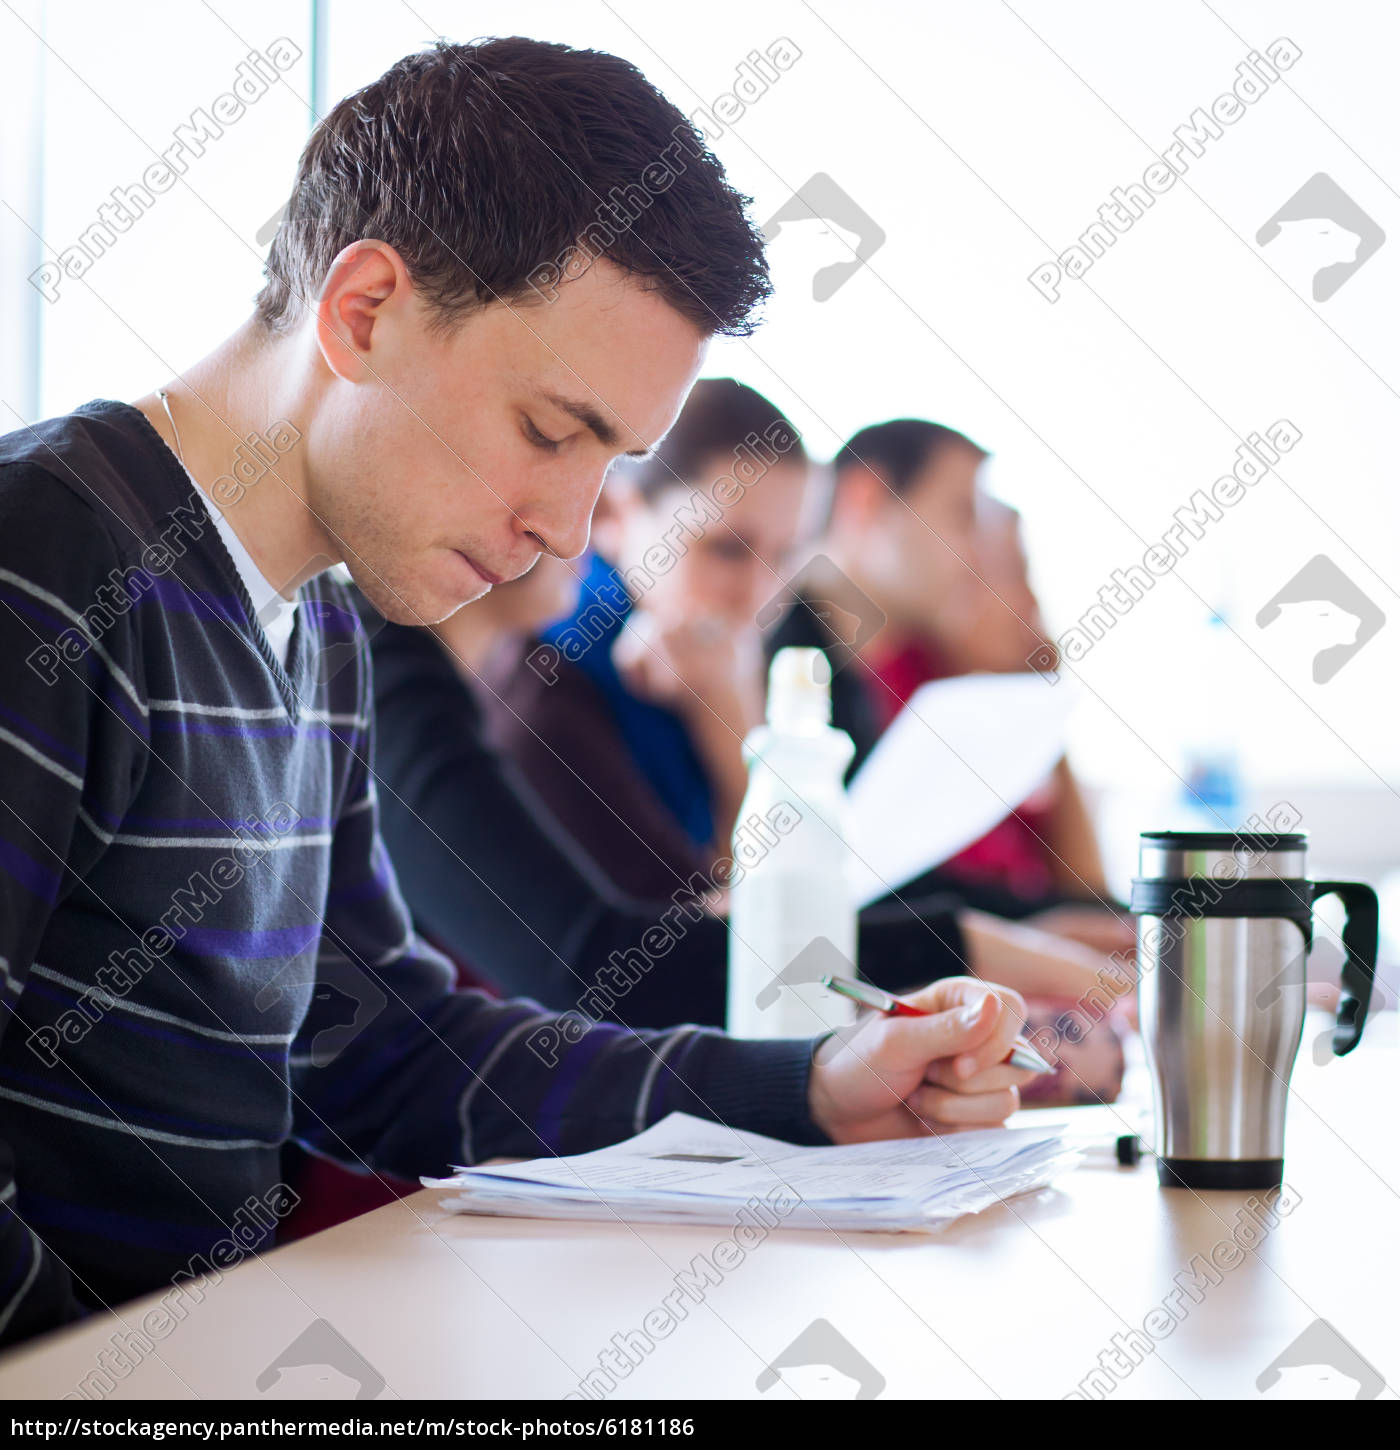 Young Male College Student Sitting In A Classroom Stock Photo